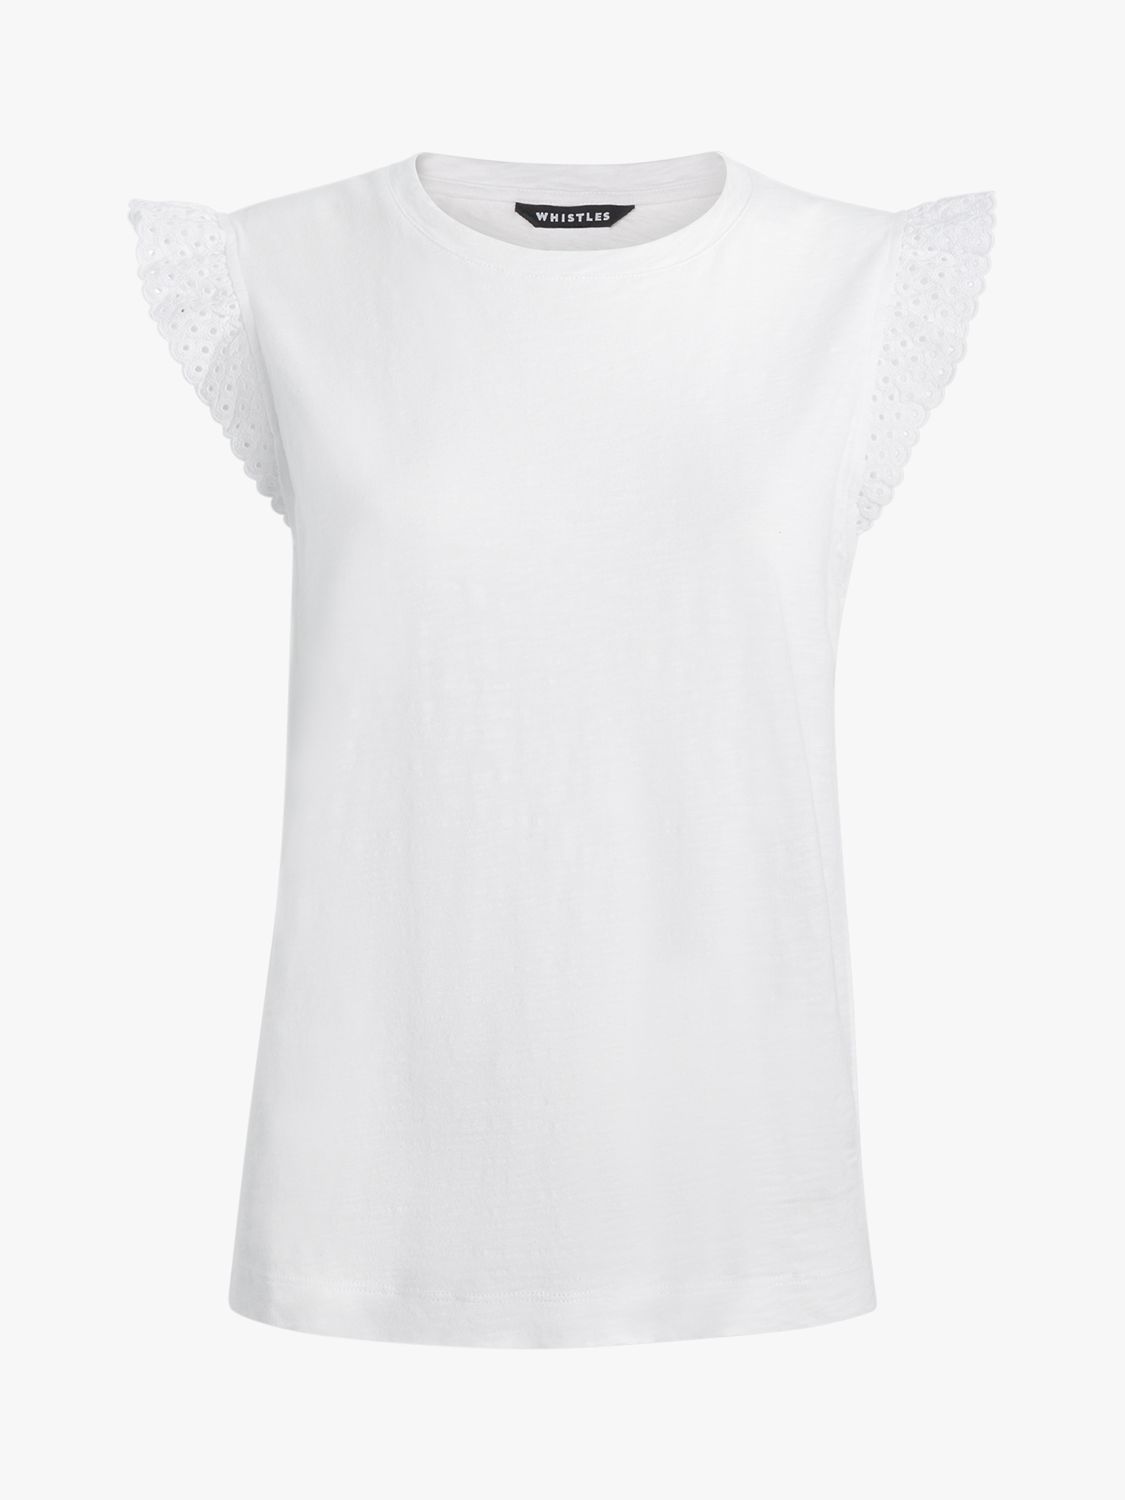 Whistles Broderie Frill Sleeve Top, White, M